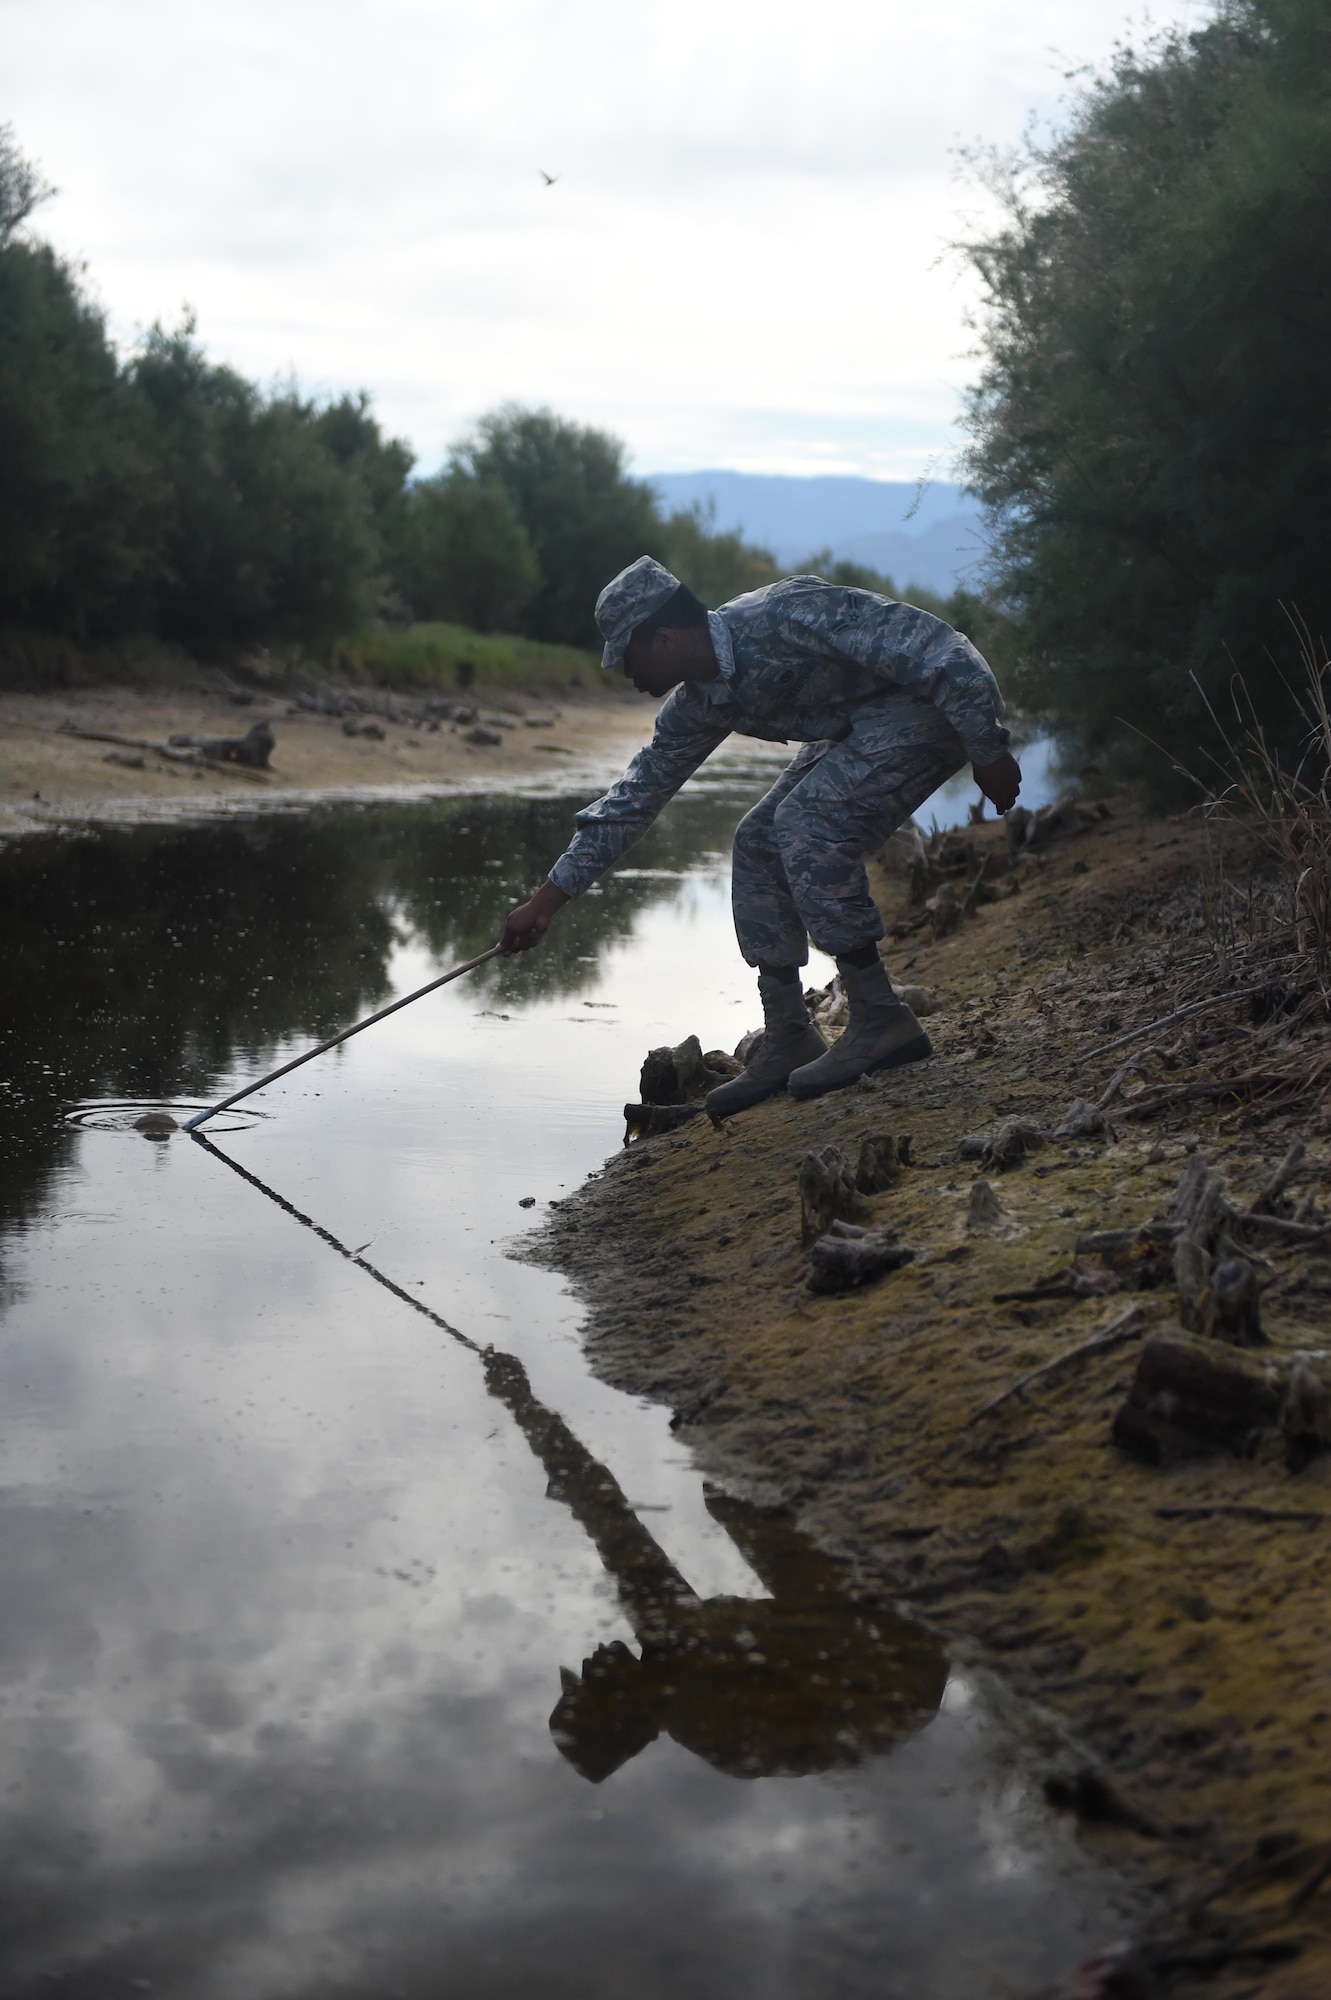 Airman 1st Class James, a 49th Civil Engineer Squadron pest management specialist, collects a water sample with mosquito larvae at Holloman Air Force Base, N.M., on July 7. Pest management personnel conduct pest management surveys, and determine actions needed to control infestations of plant and animal pests. (Last names are being withheld due to operational requirements. U.S. Air Force photo by Staff Sgt. Eboni Prince)